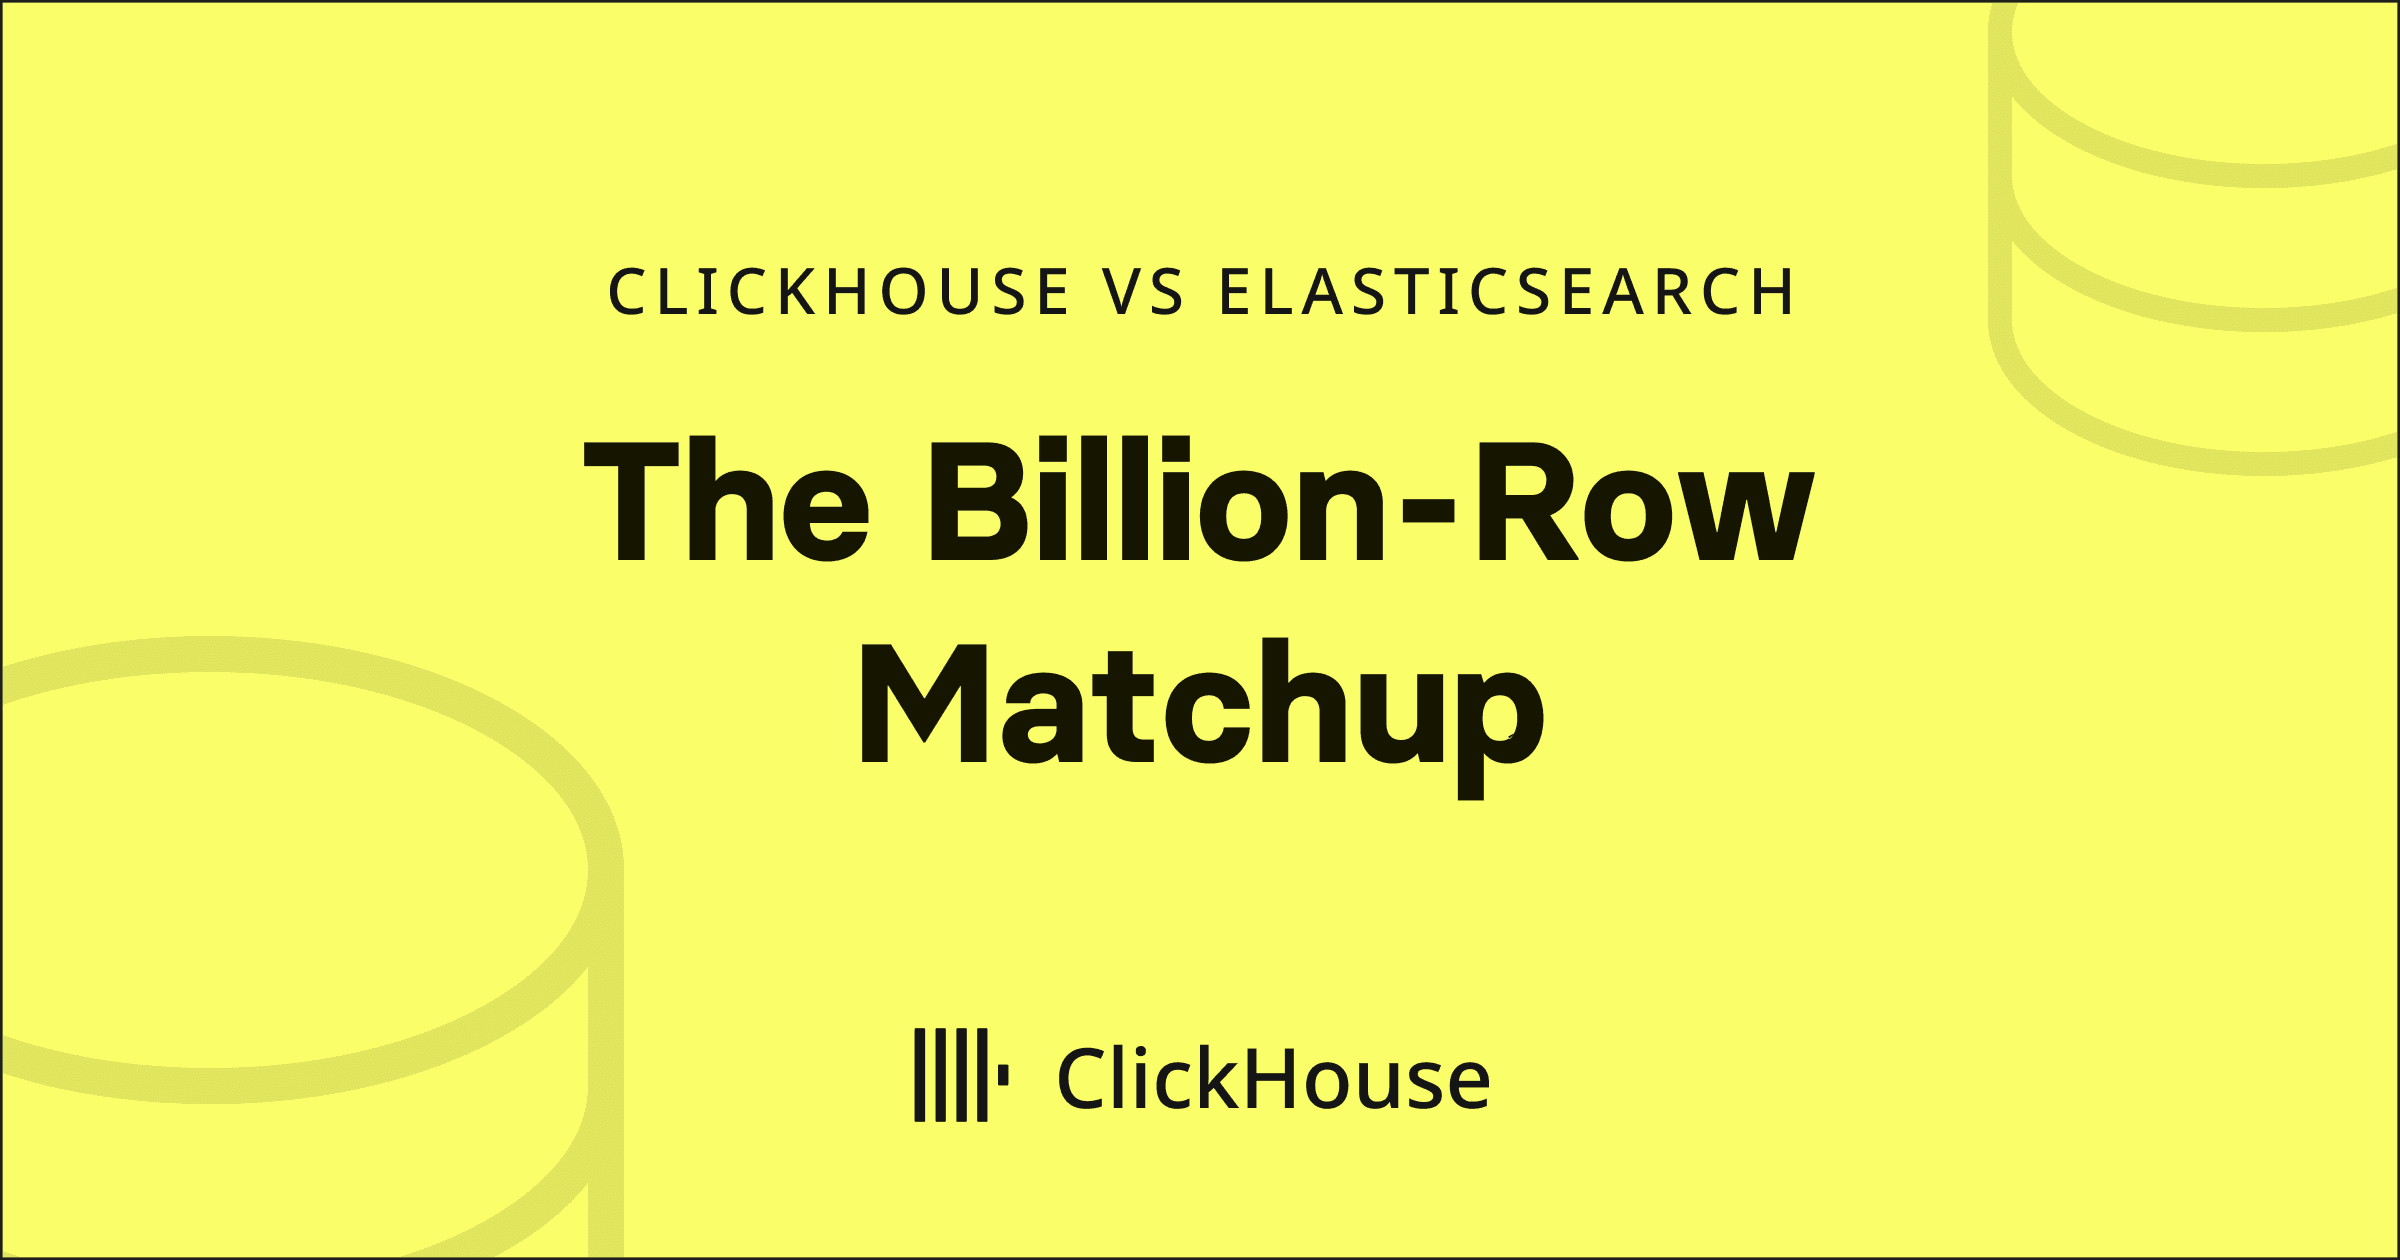 This blog examines the performance of ClickHouse vs. Elasticsearch for workloads commonly present in large-scale data analytics and observability use 